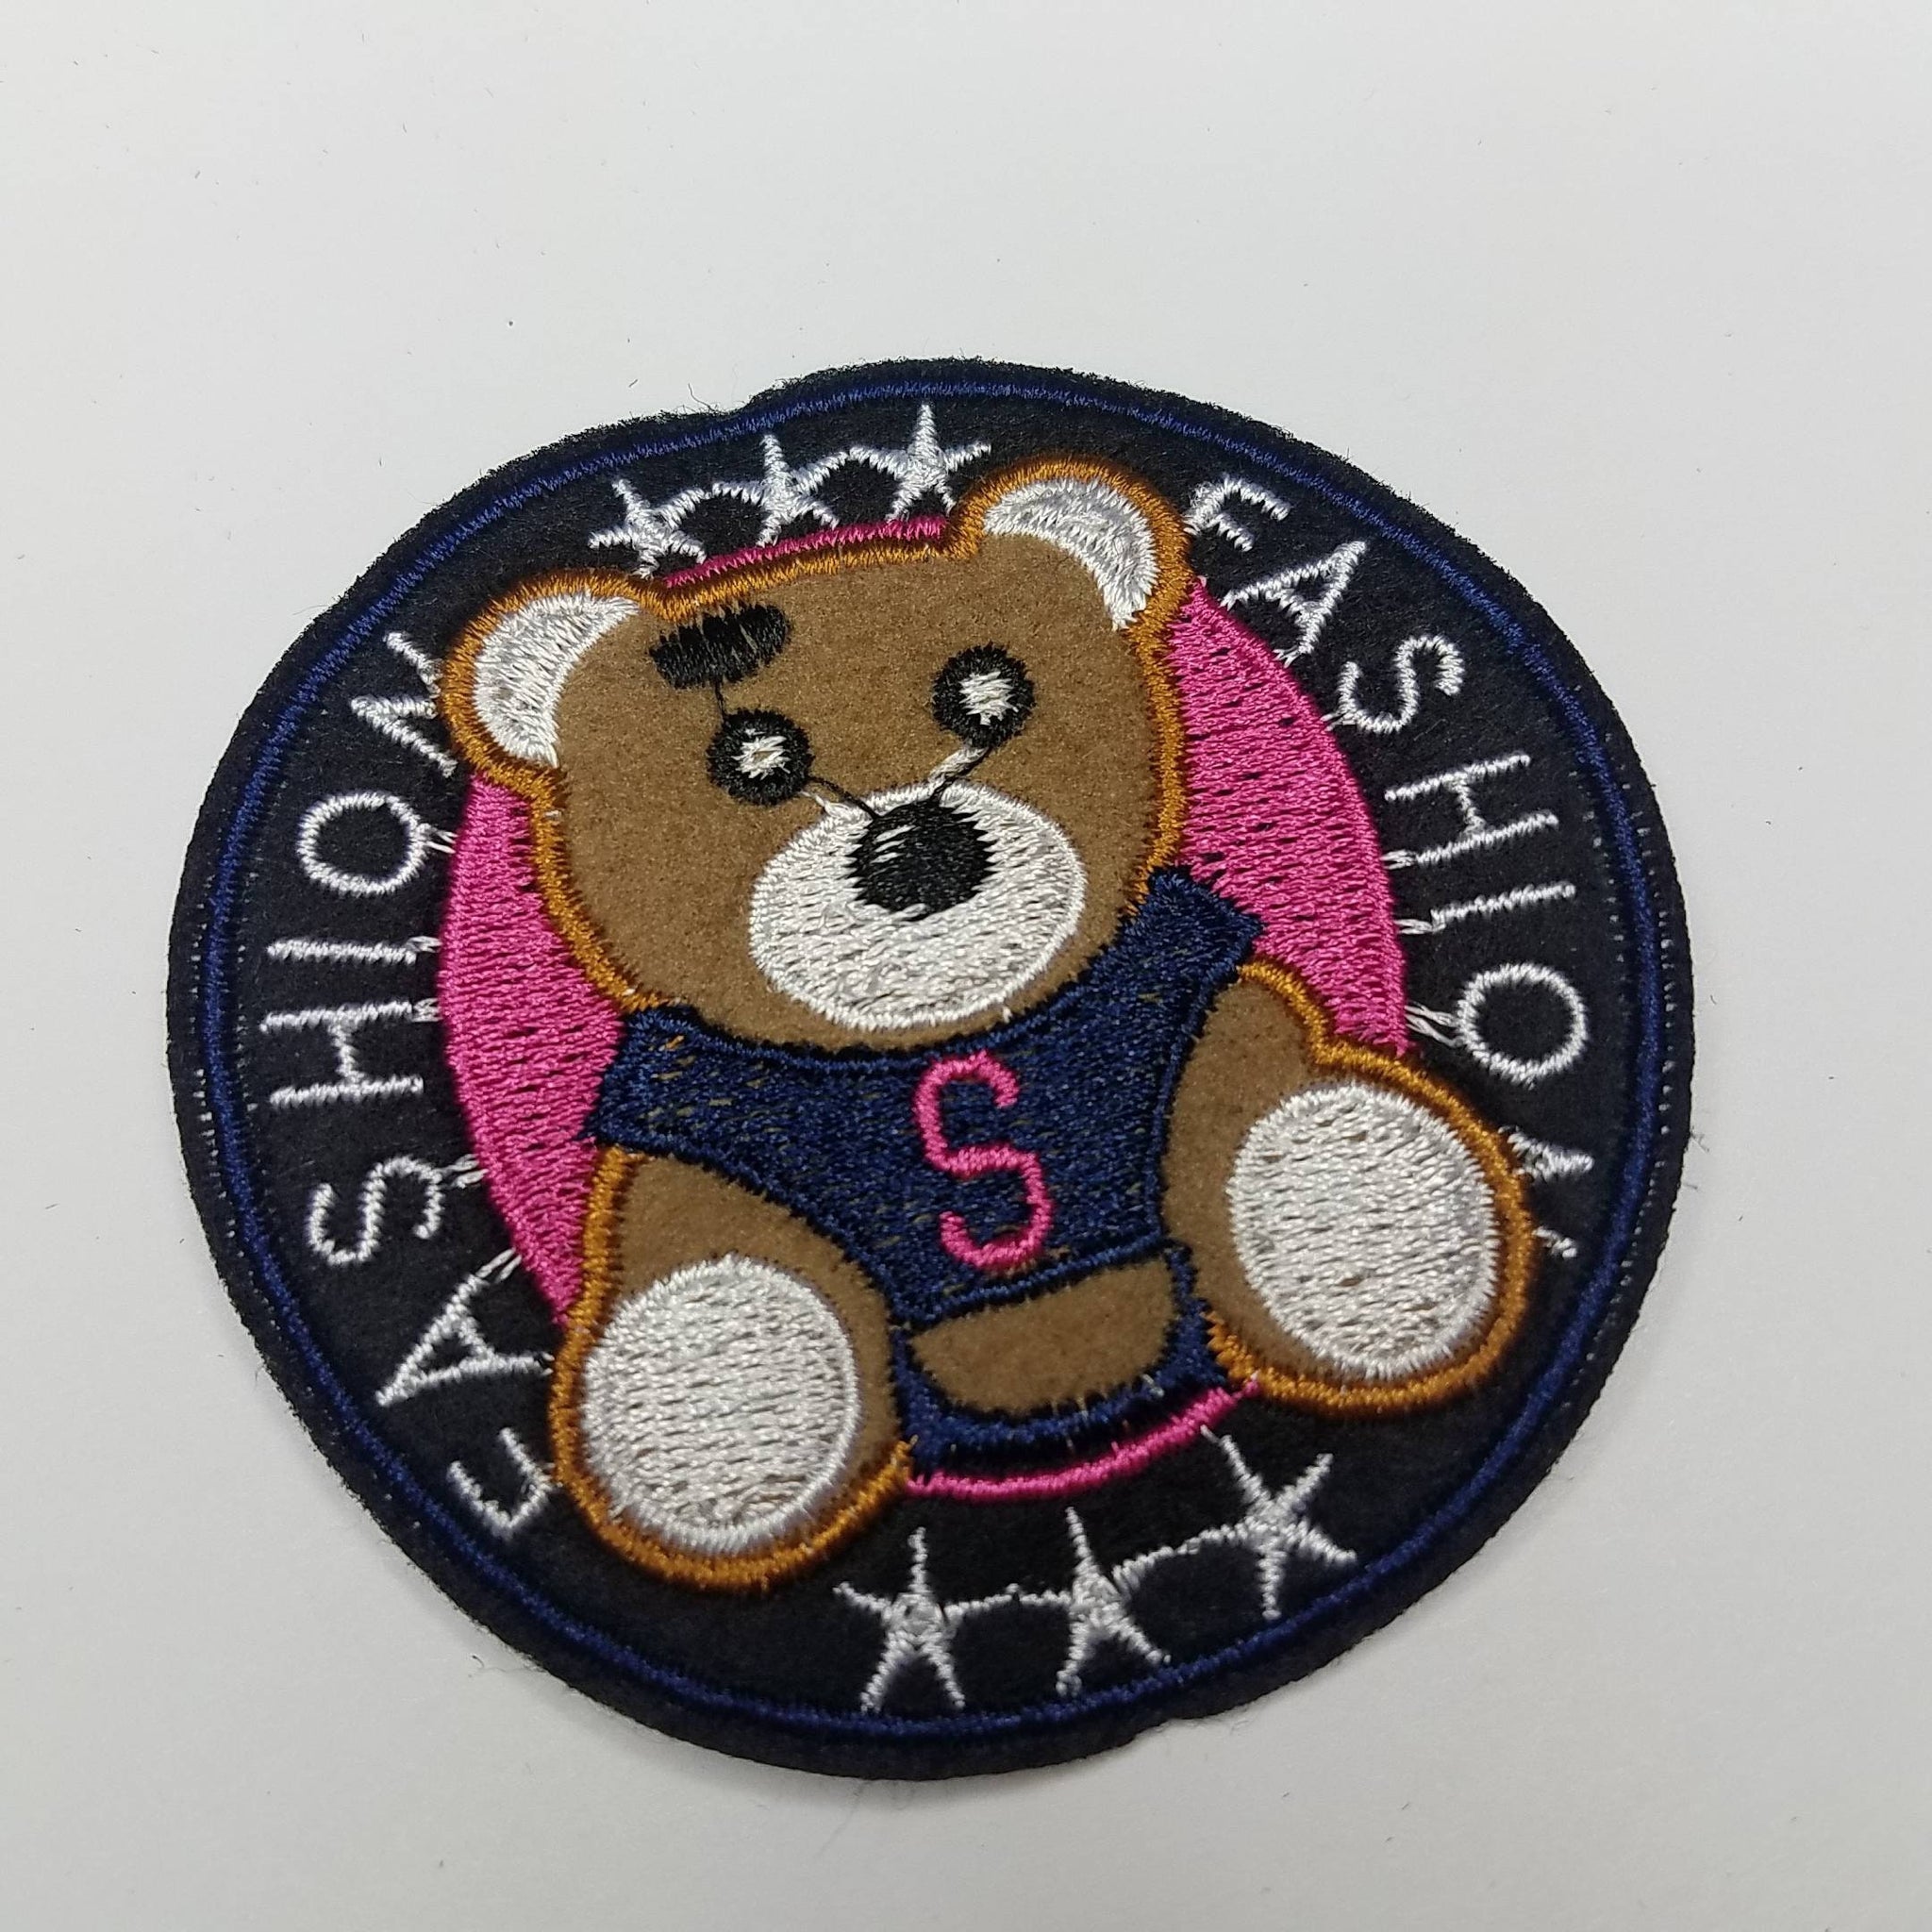 Fashion Bear Circular Patch, Sew on Embroidered Patch, Statement Applique, Fashion Patch for Clothing, 3-inch x 3-inch badge